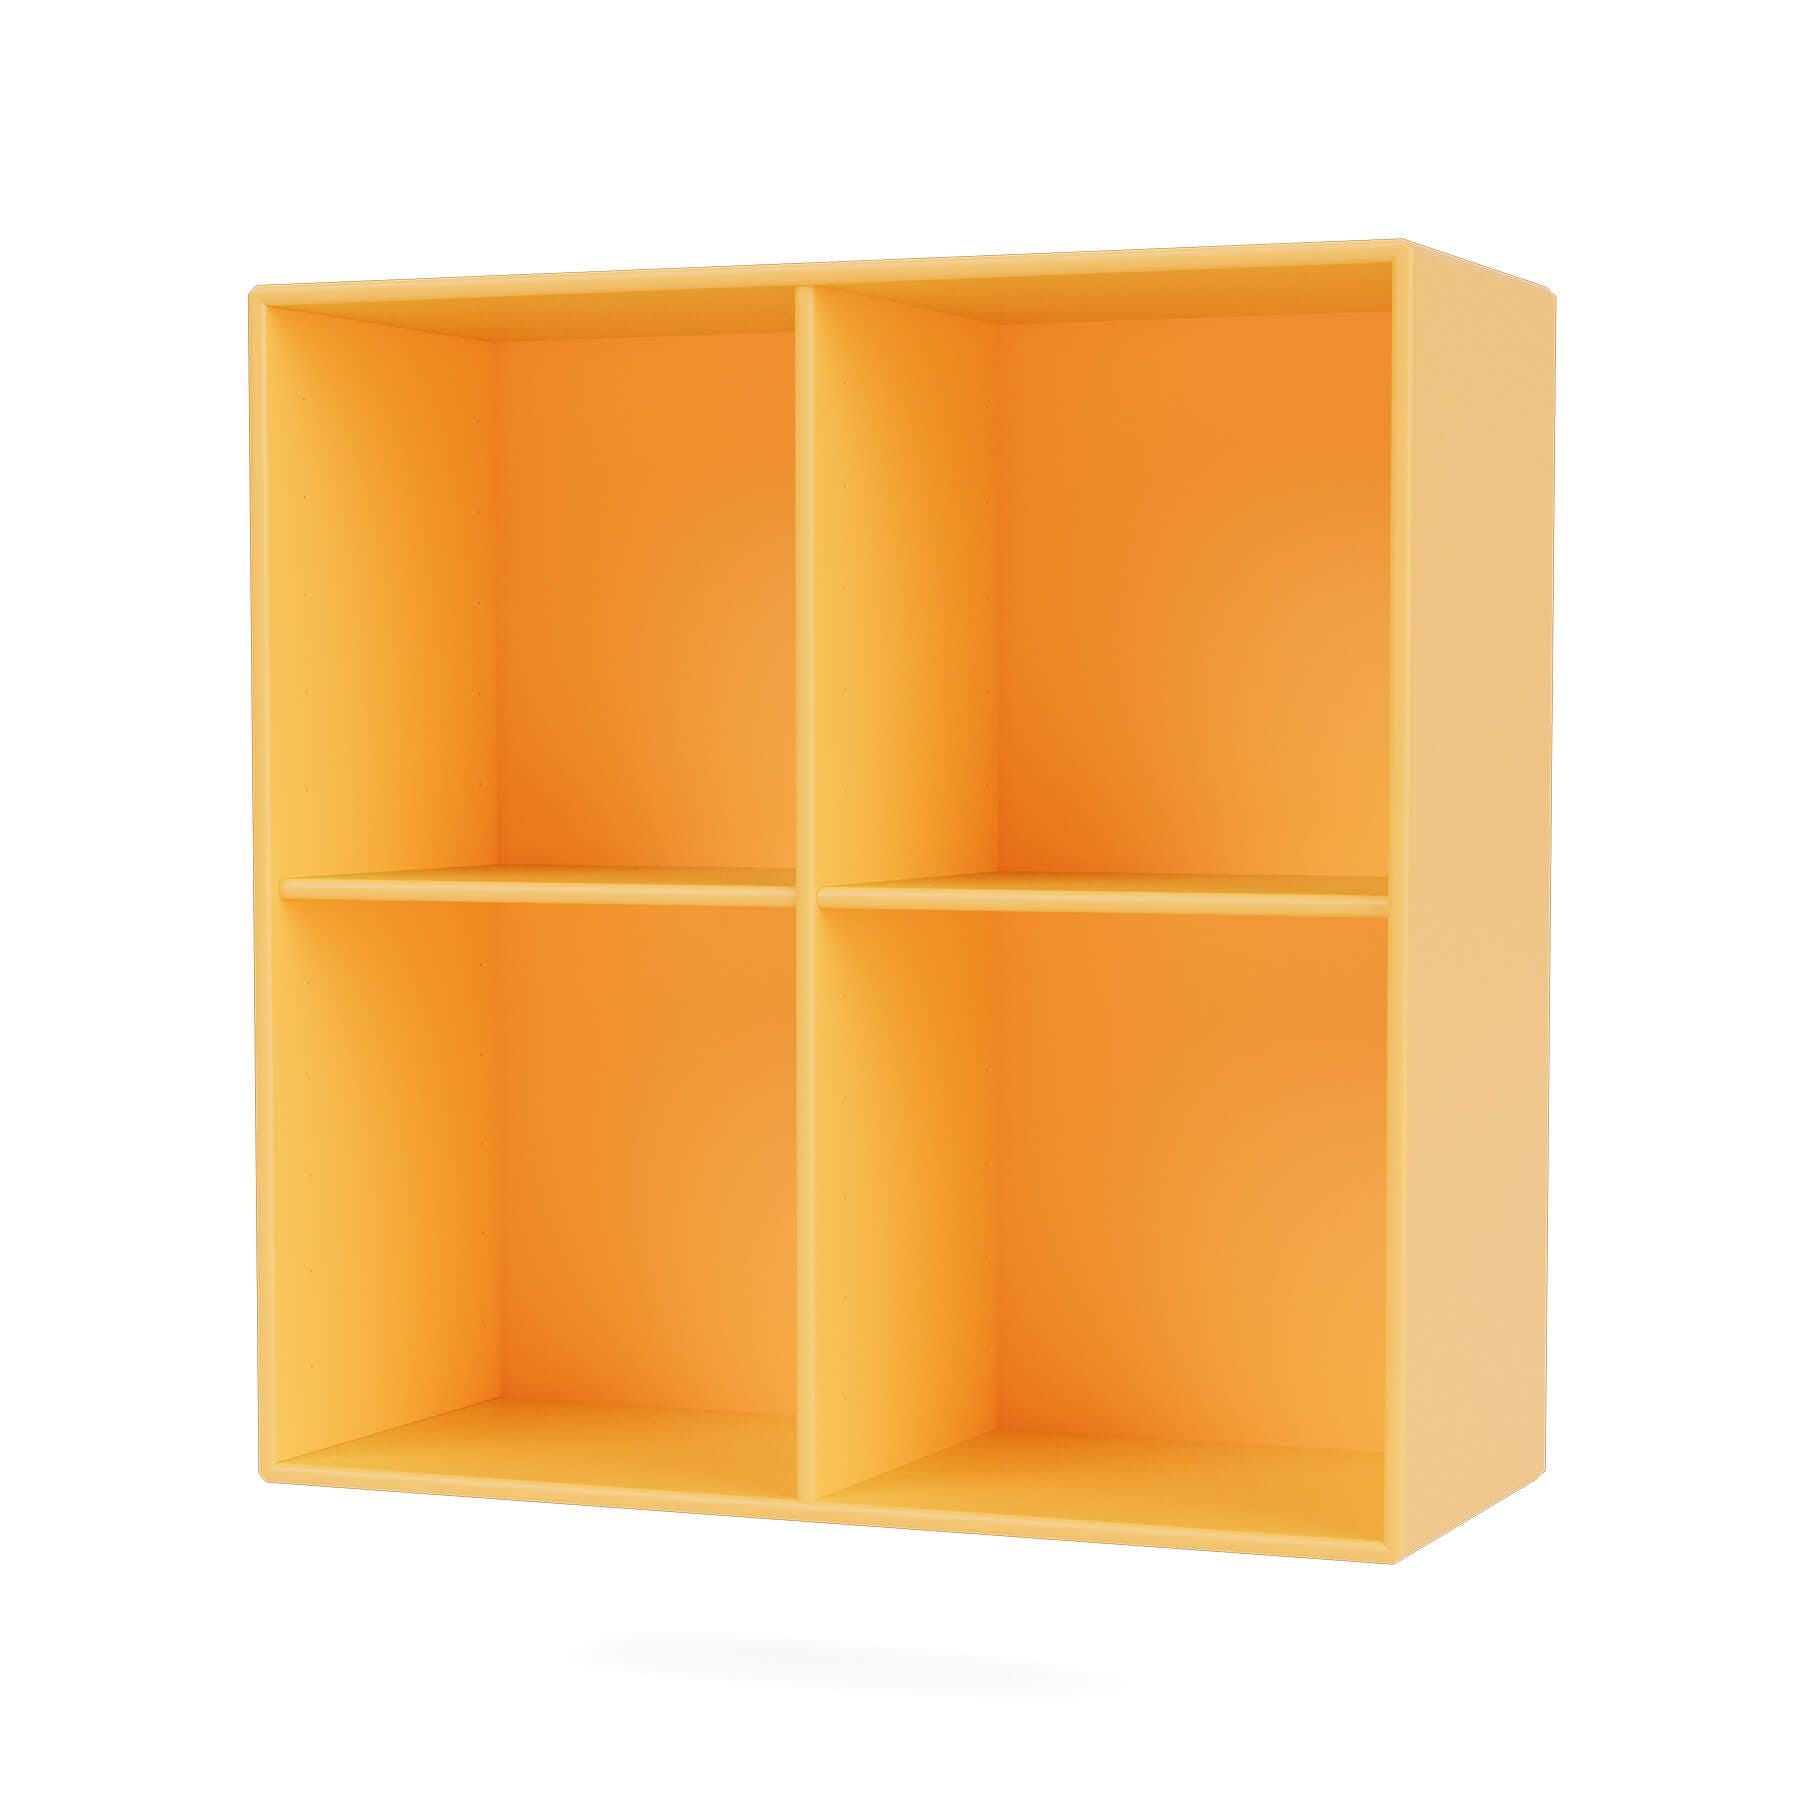 Montana Show Bookcase Acacia Wall Mounted Yellow Designer Furniture From Holloways Of Ludlow